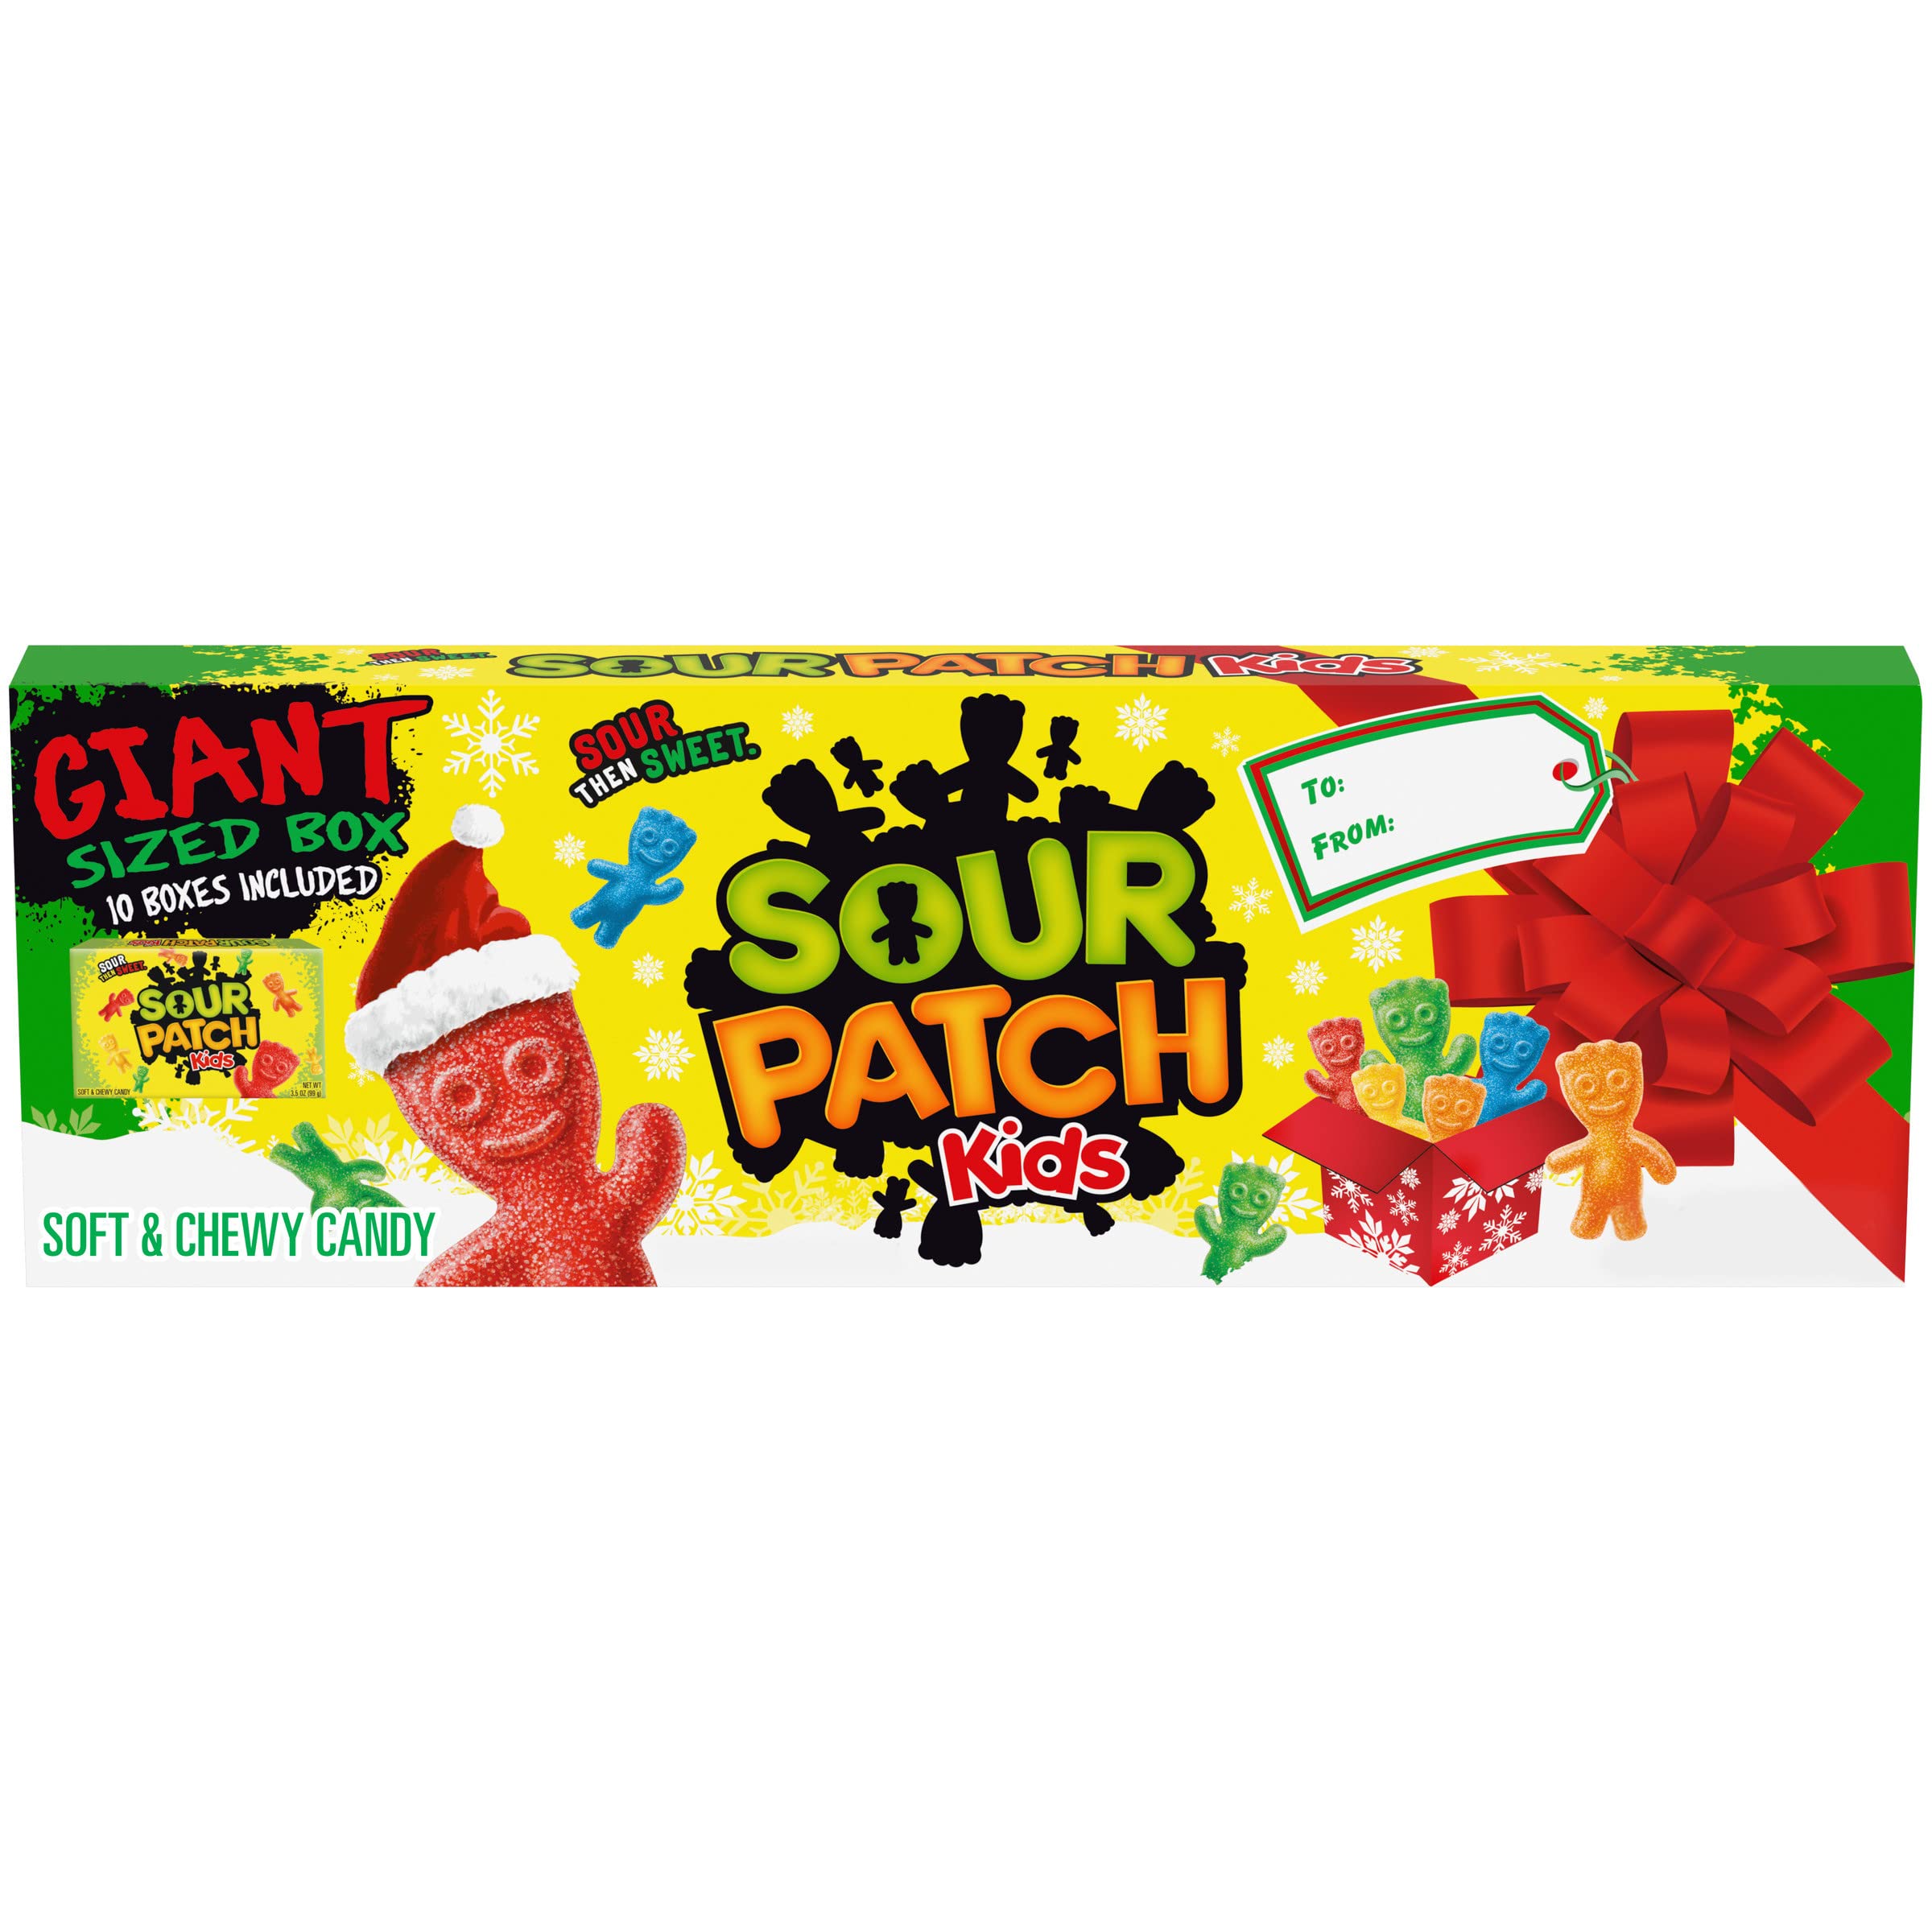 Sour Patch Kids Giant Sized Box Soft & Chewy Candy (Includes 10-Packs of 3.1-Oz Boxes) $5.75 + Free Shipping w/ Prime or on $25+